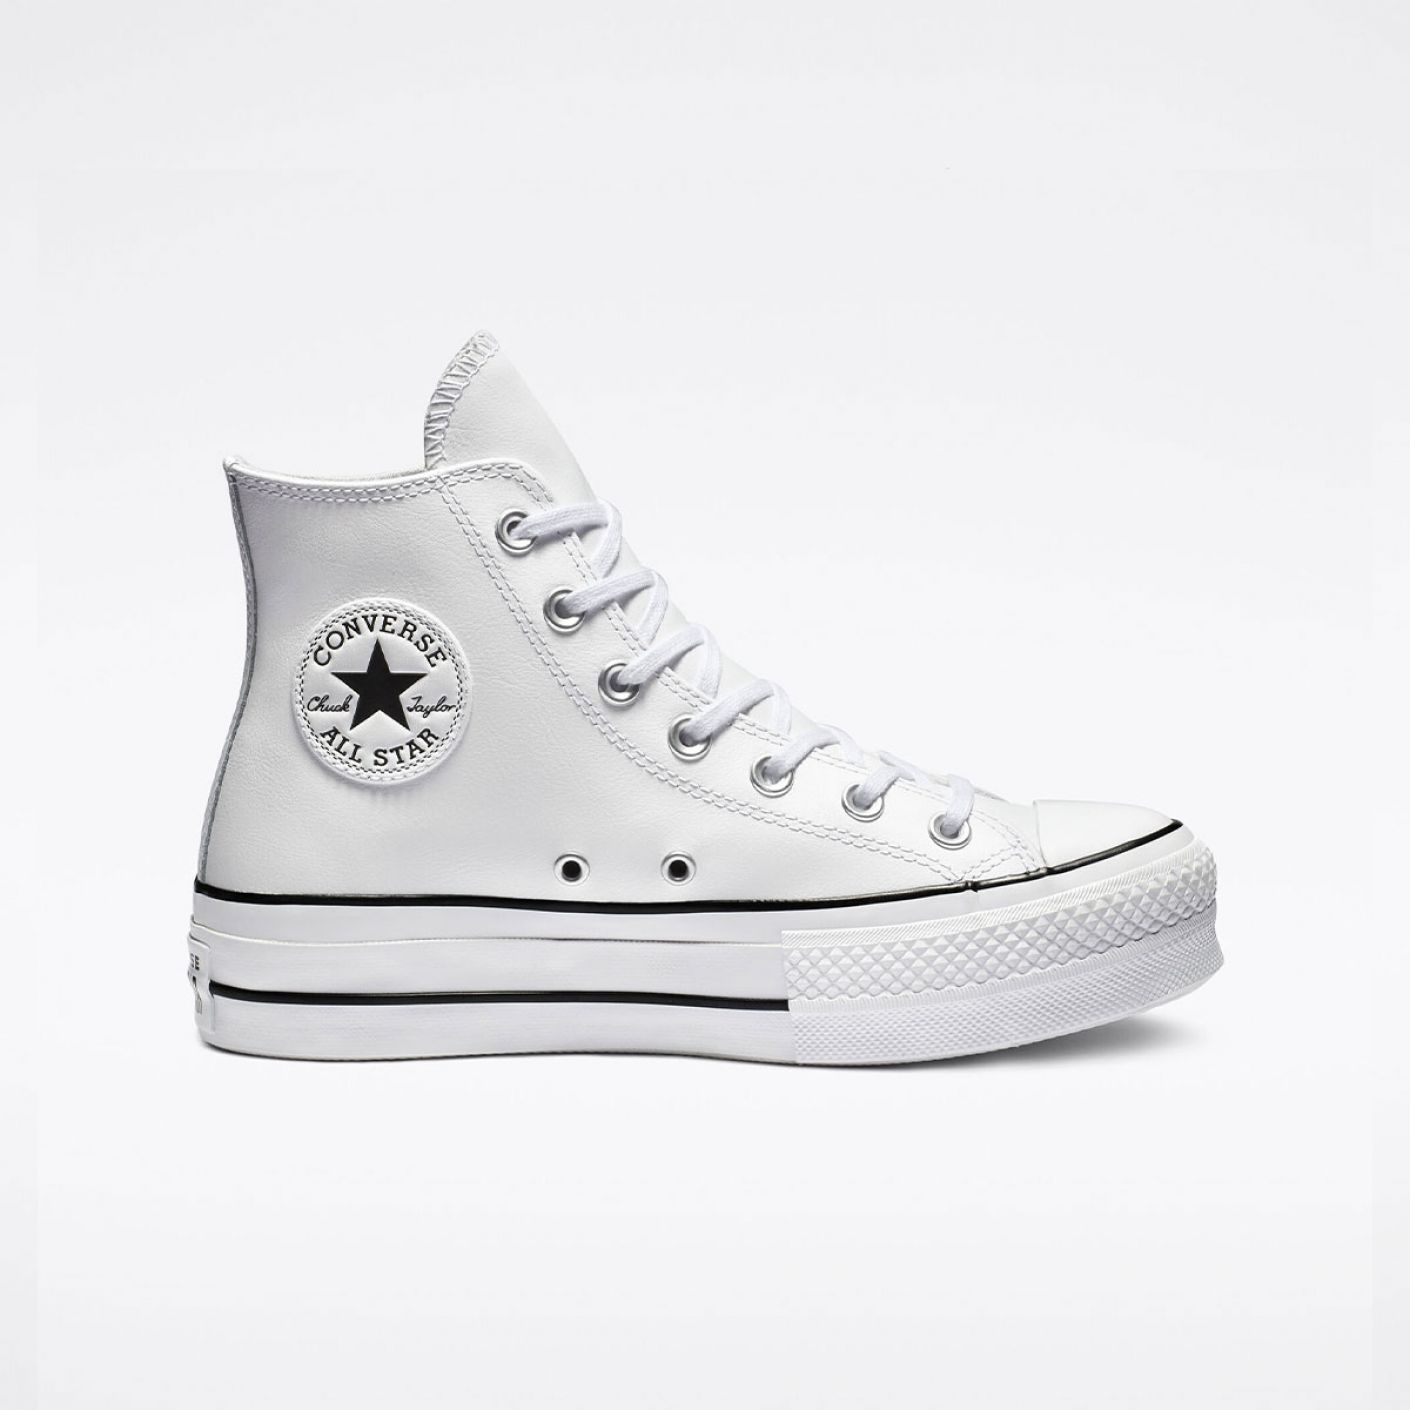 Converse Chuck Taylor All Star Lift in Pelle Bianca